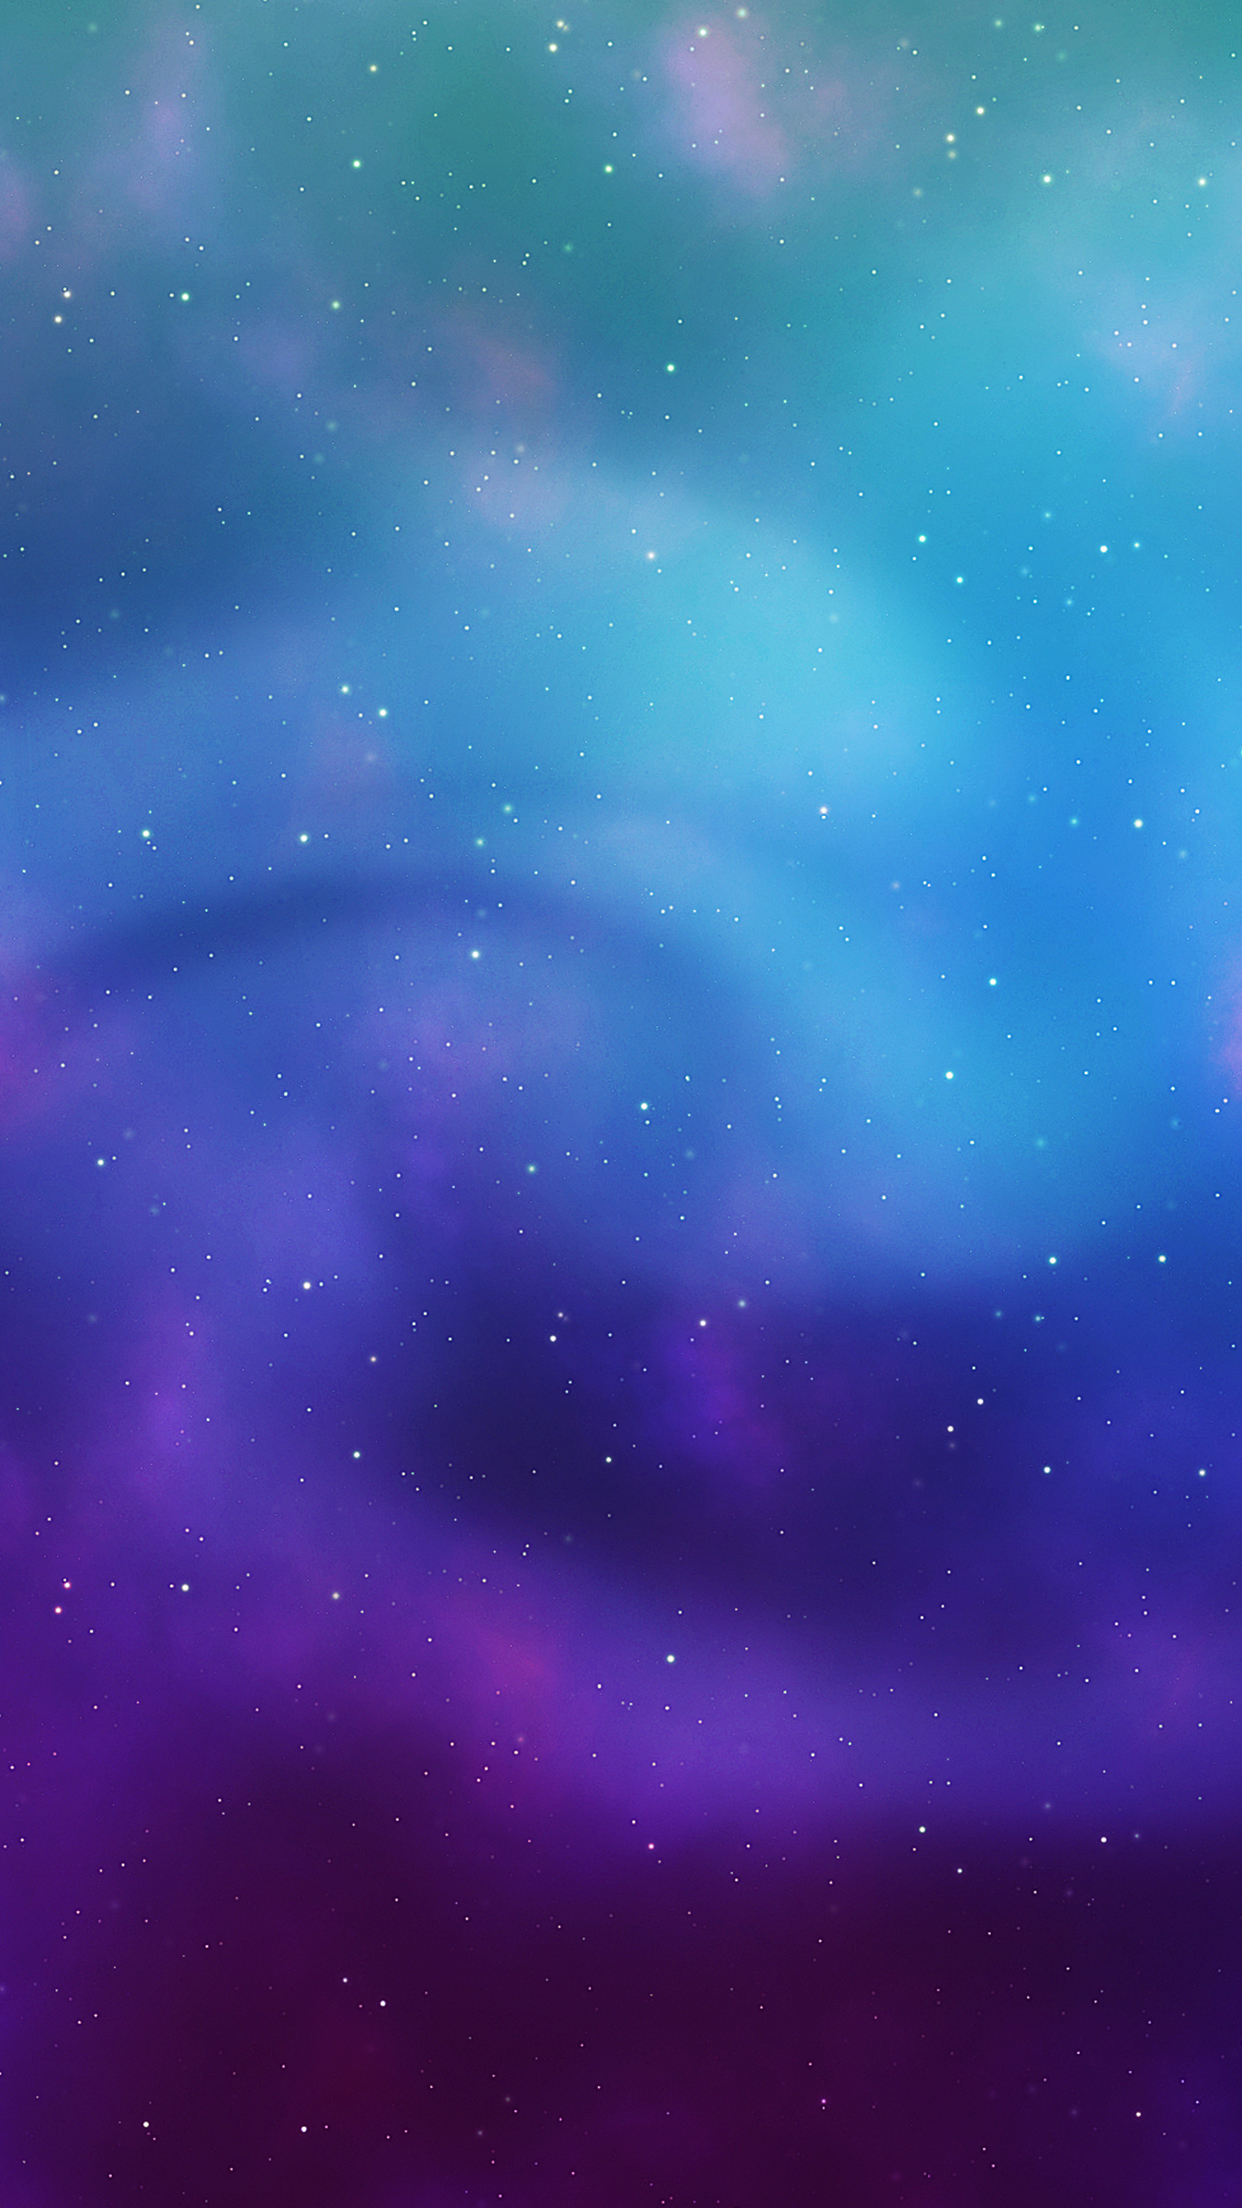 Expansive space wallpapers for iPhone iPad and desktop